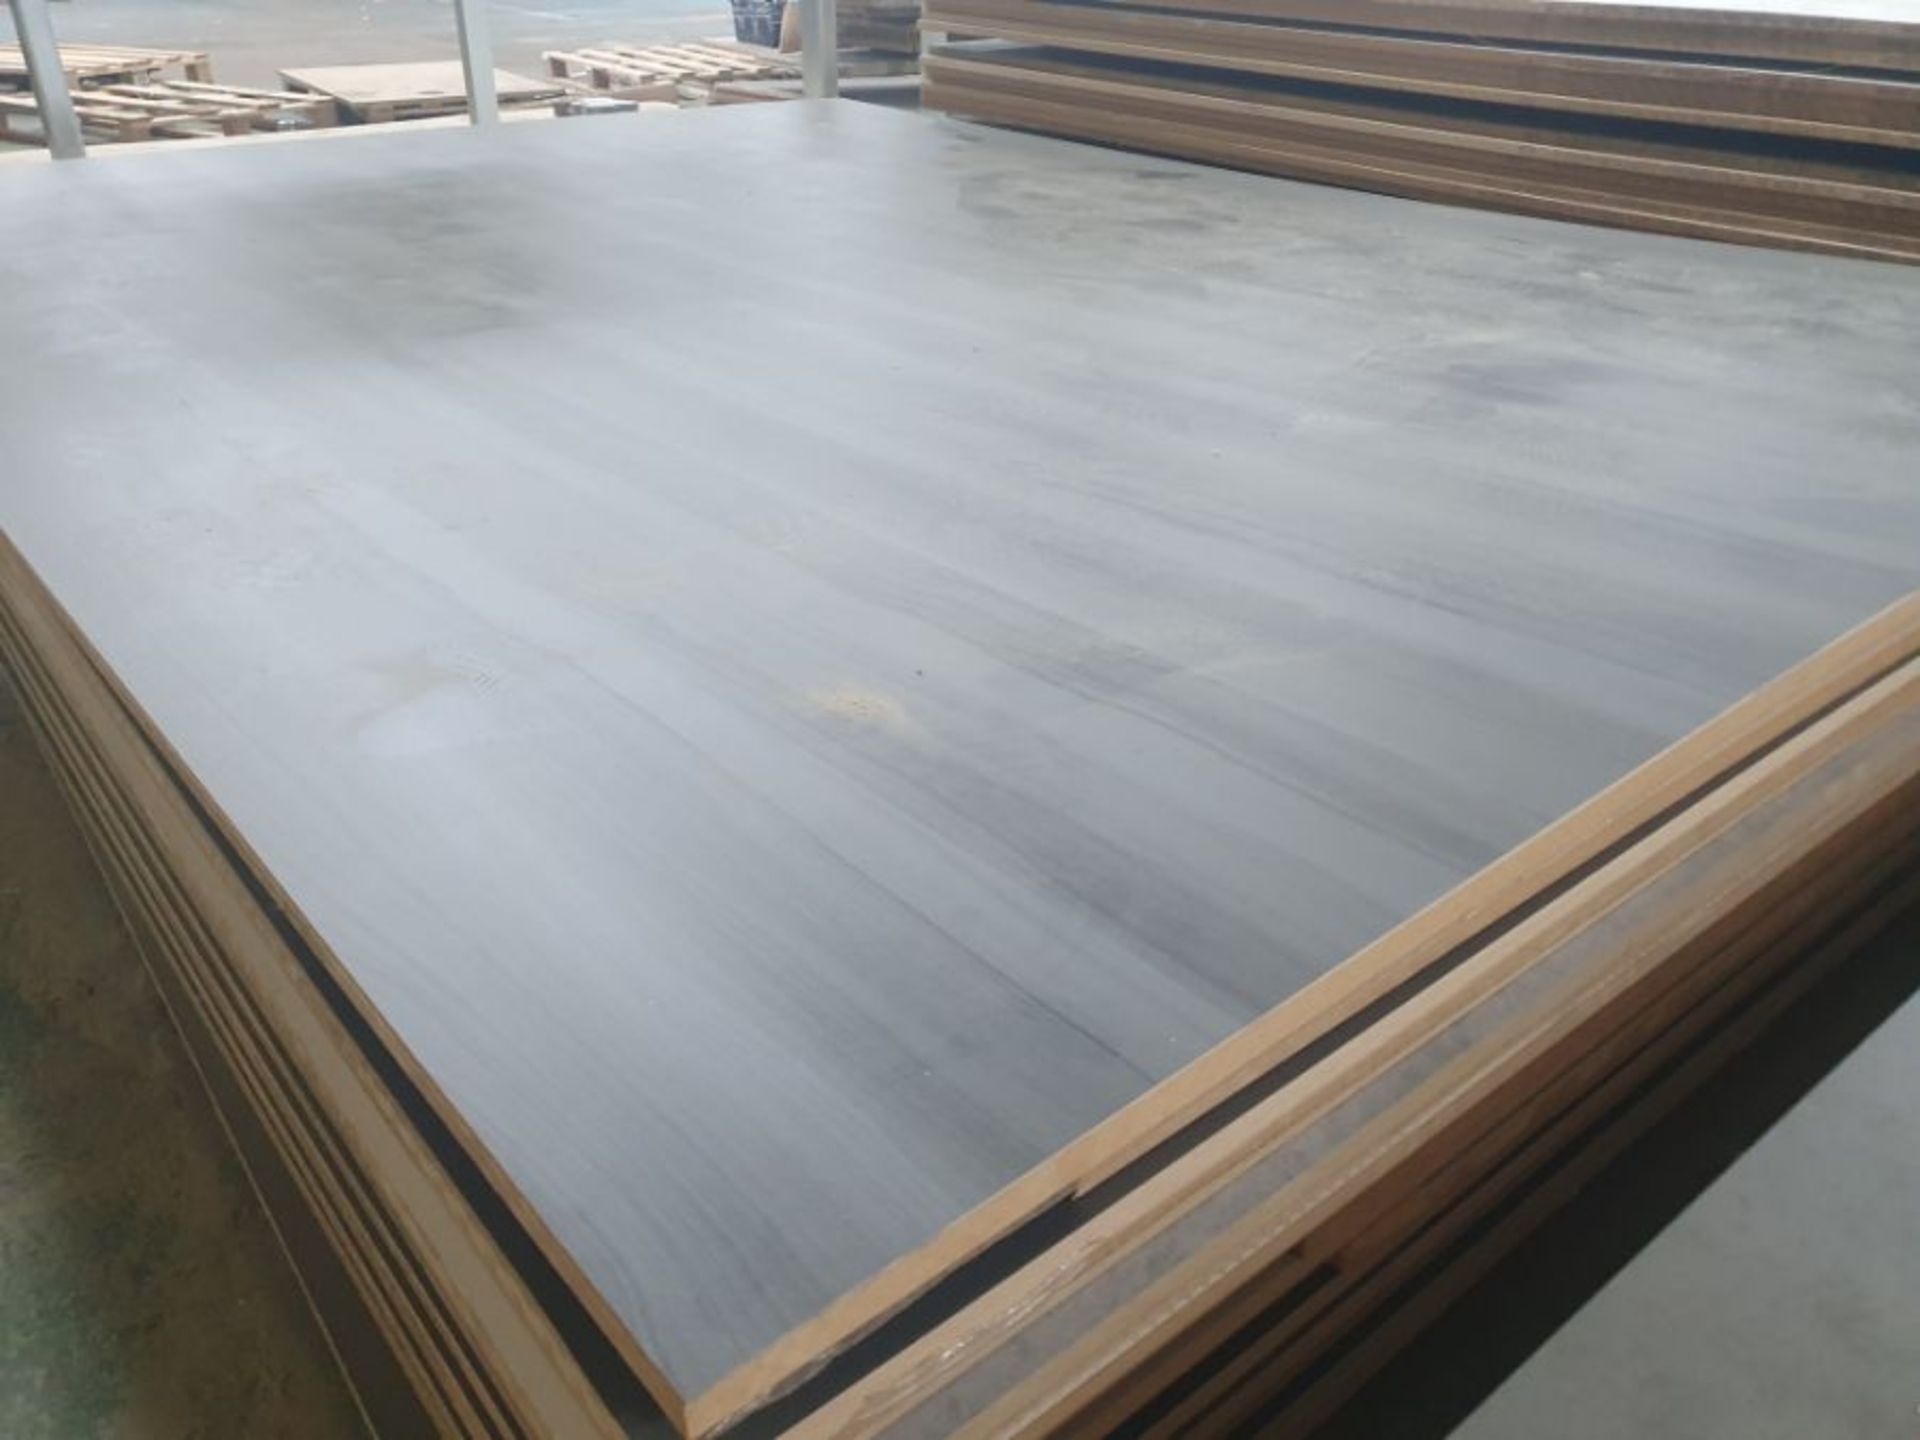 Large Quantity of Duropal Laminated Worksurfaces, Egger Eurospan E1 P2 18mm Chipboard and MDF Availa - Image 8 of 9